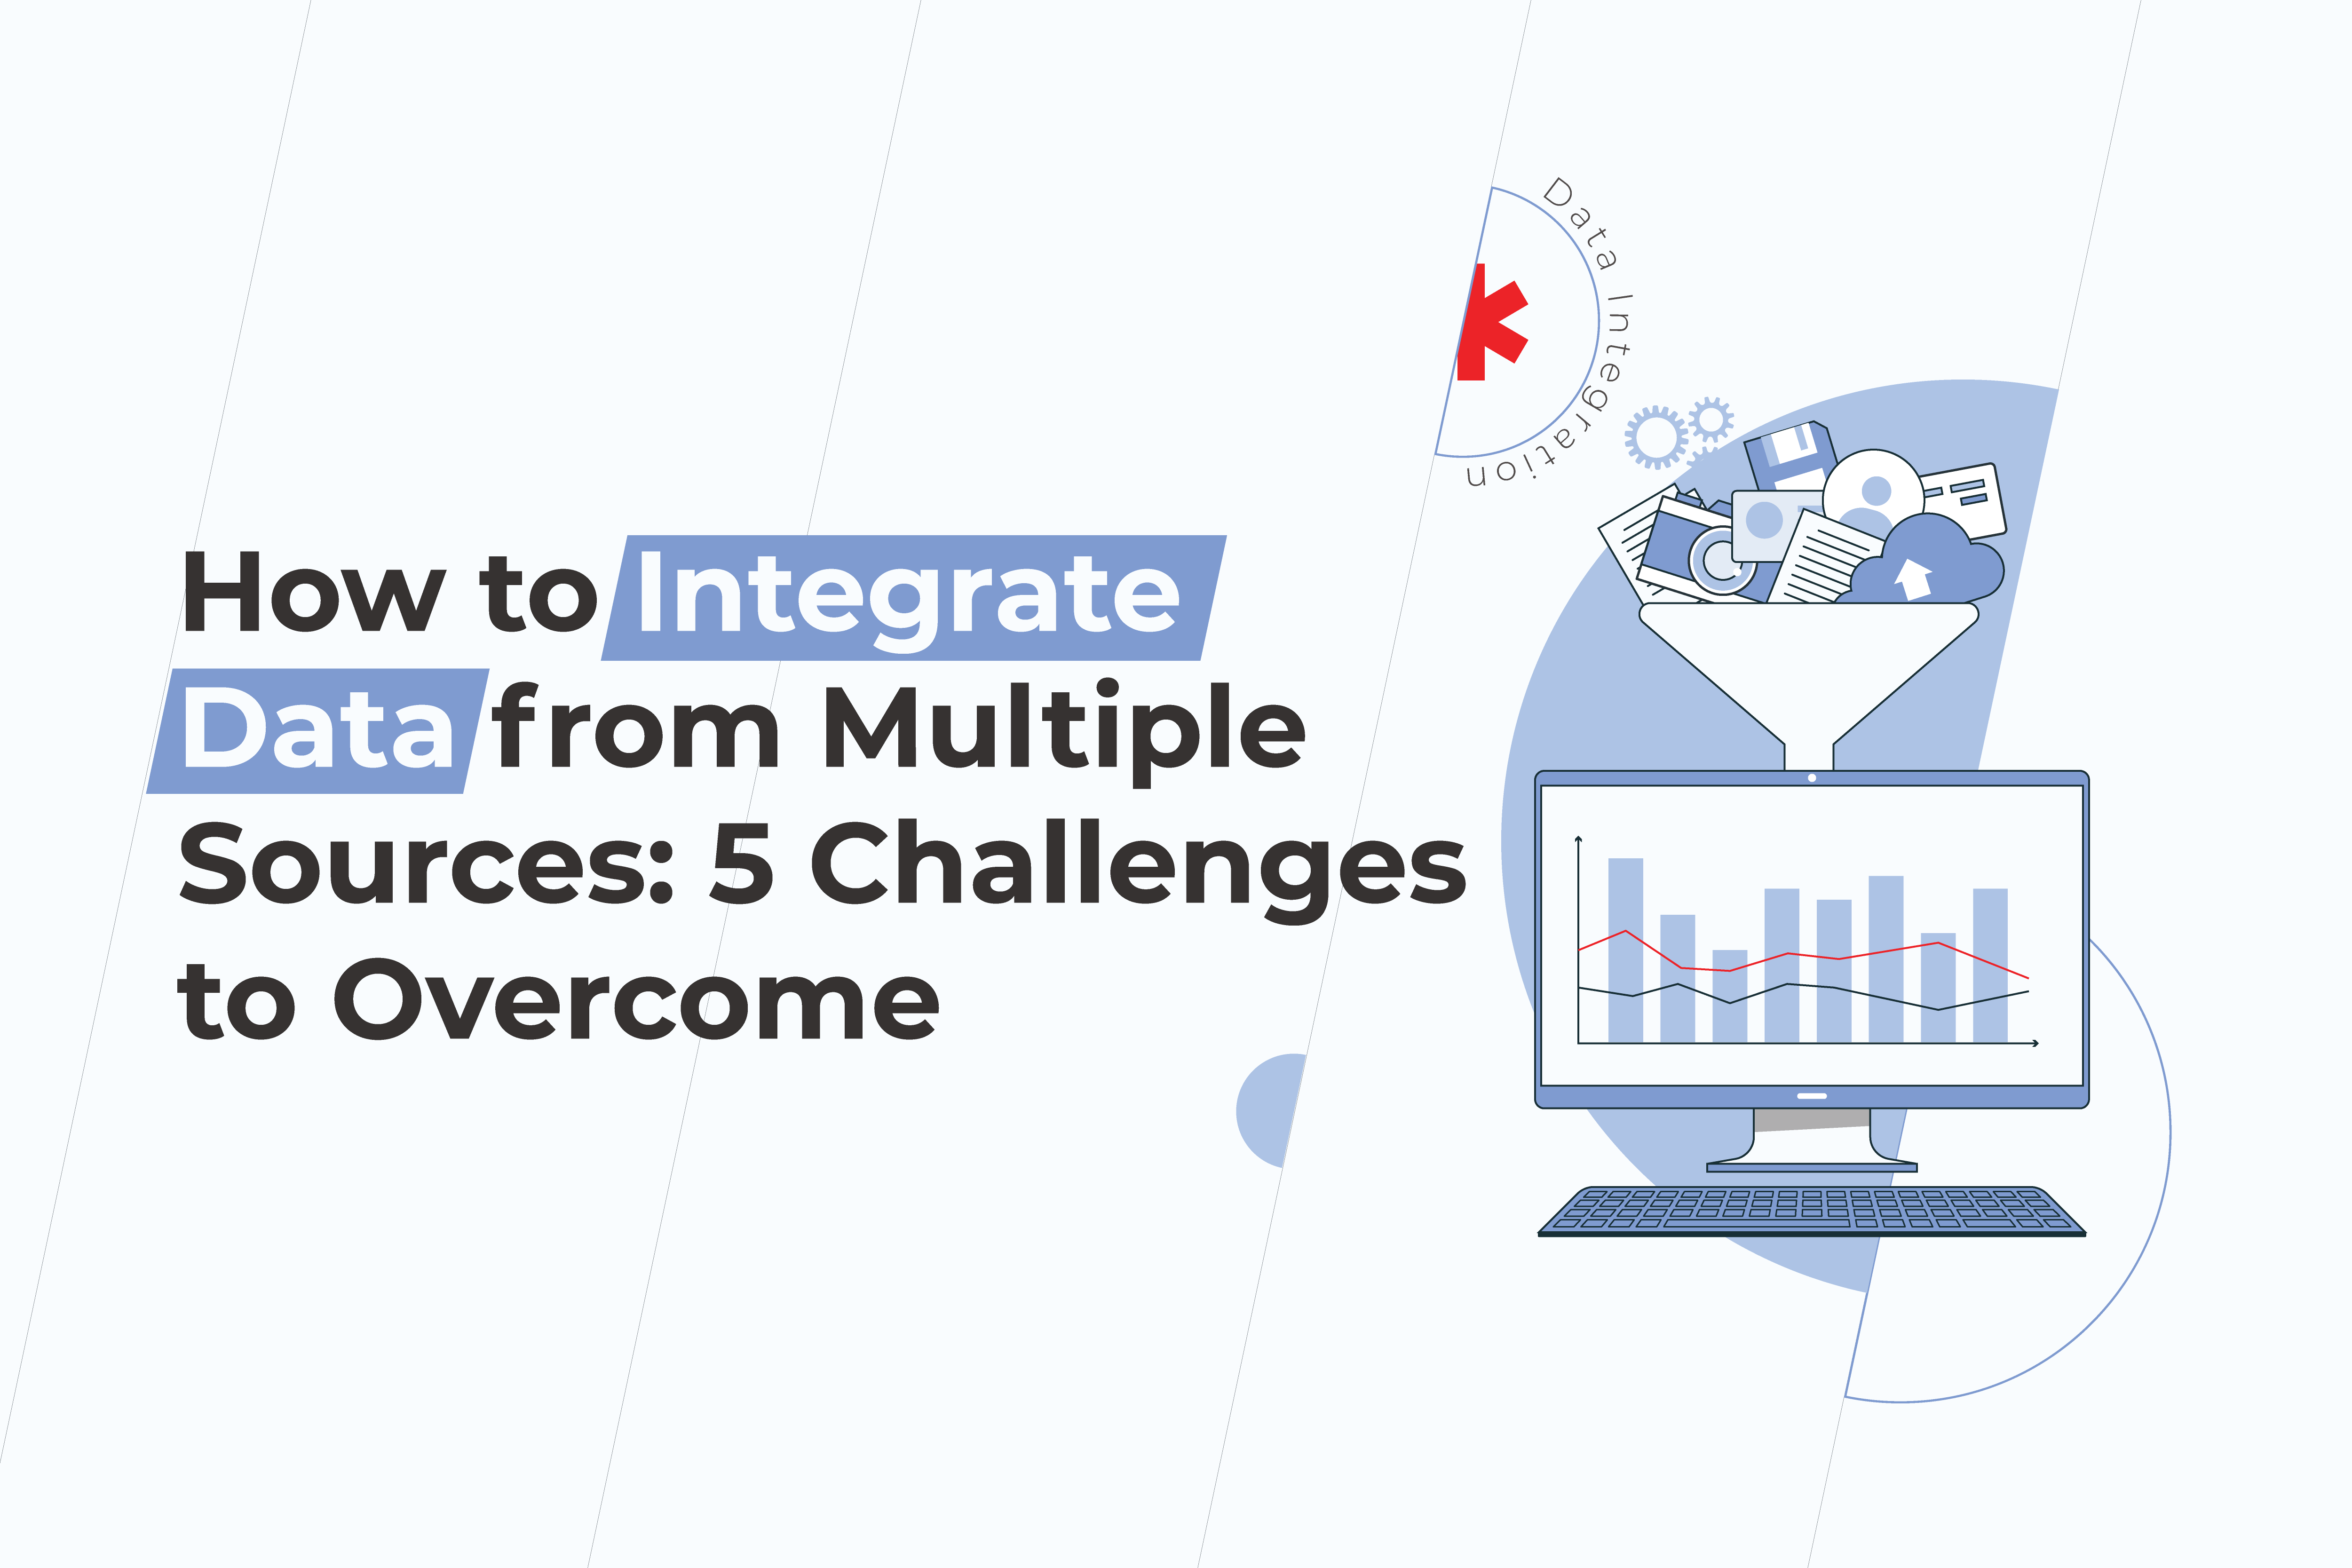 How to Integrate Data from Multiple Sources: 5 Challenges to Overcome